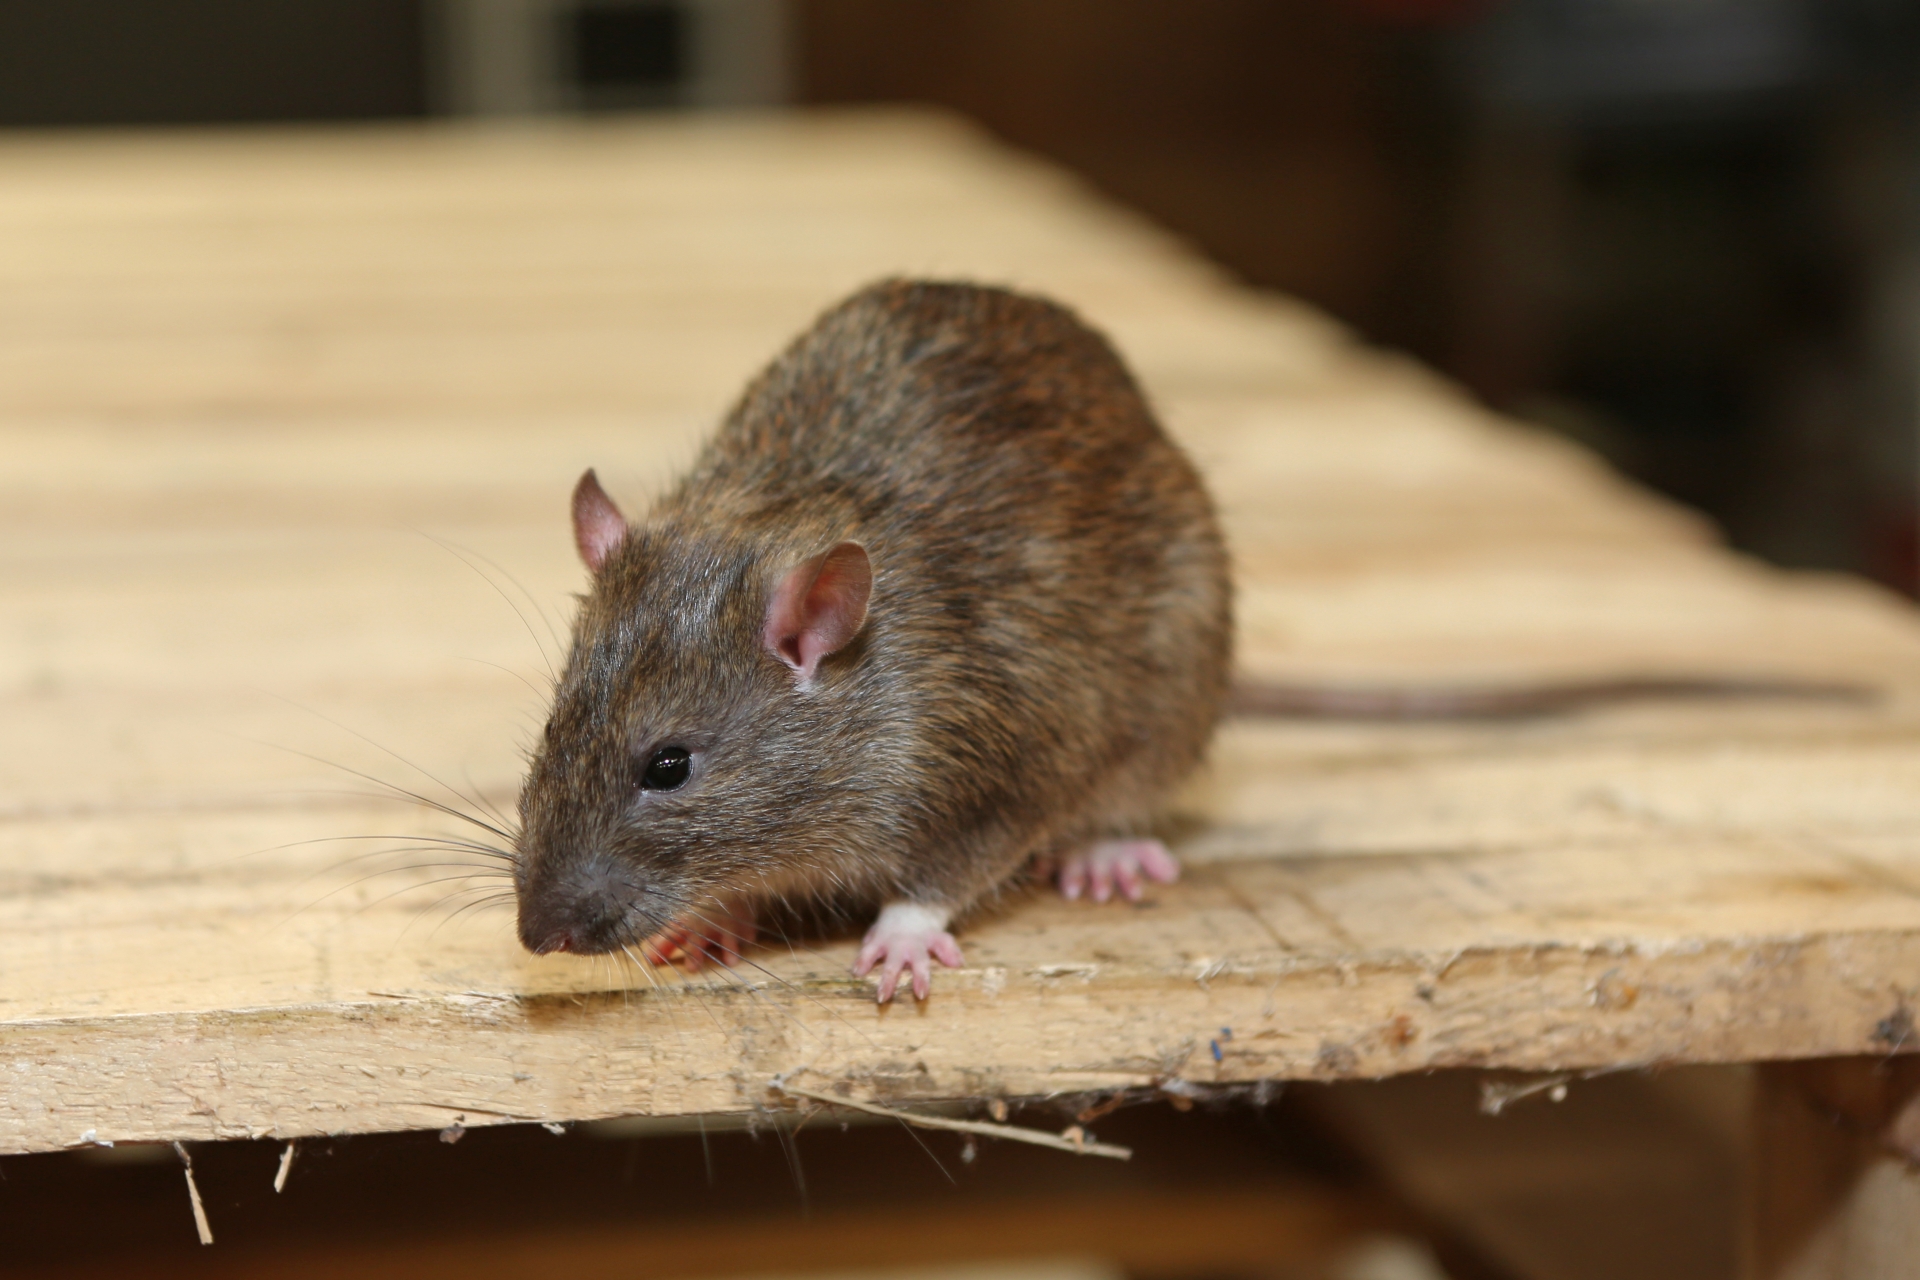 Rat Control, Pest Control in Headley, KT18. Call Now 020 8166 9746